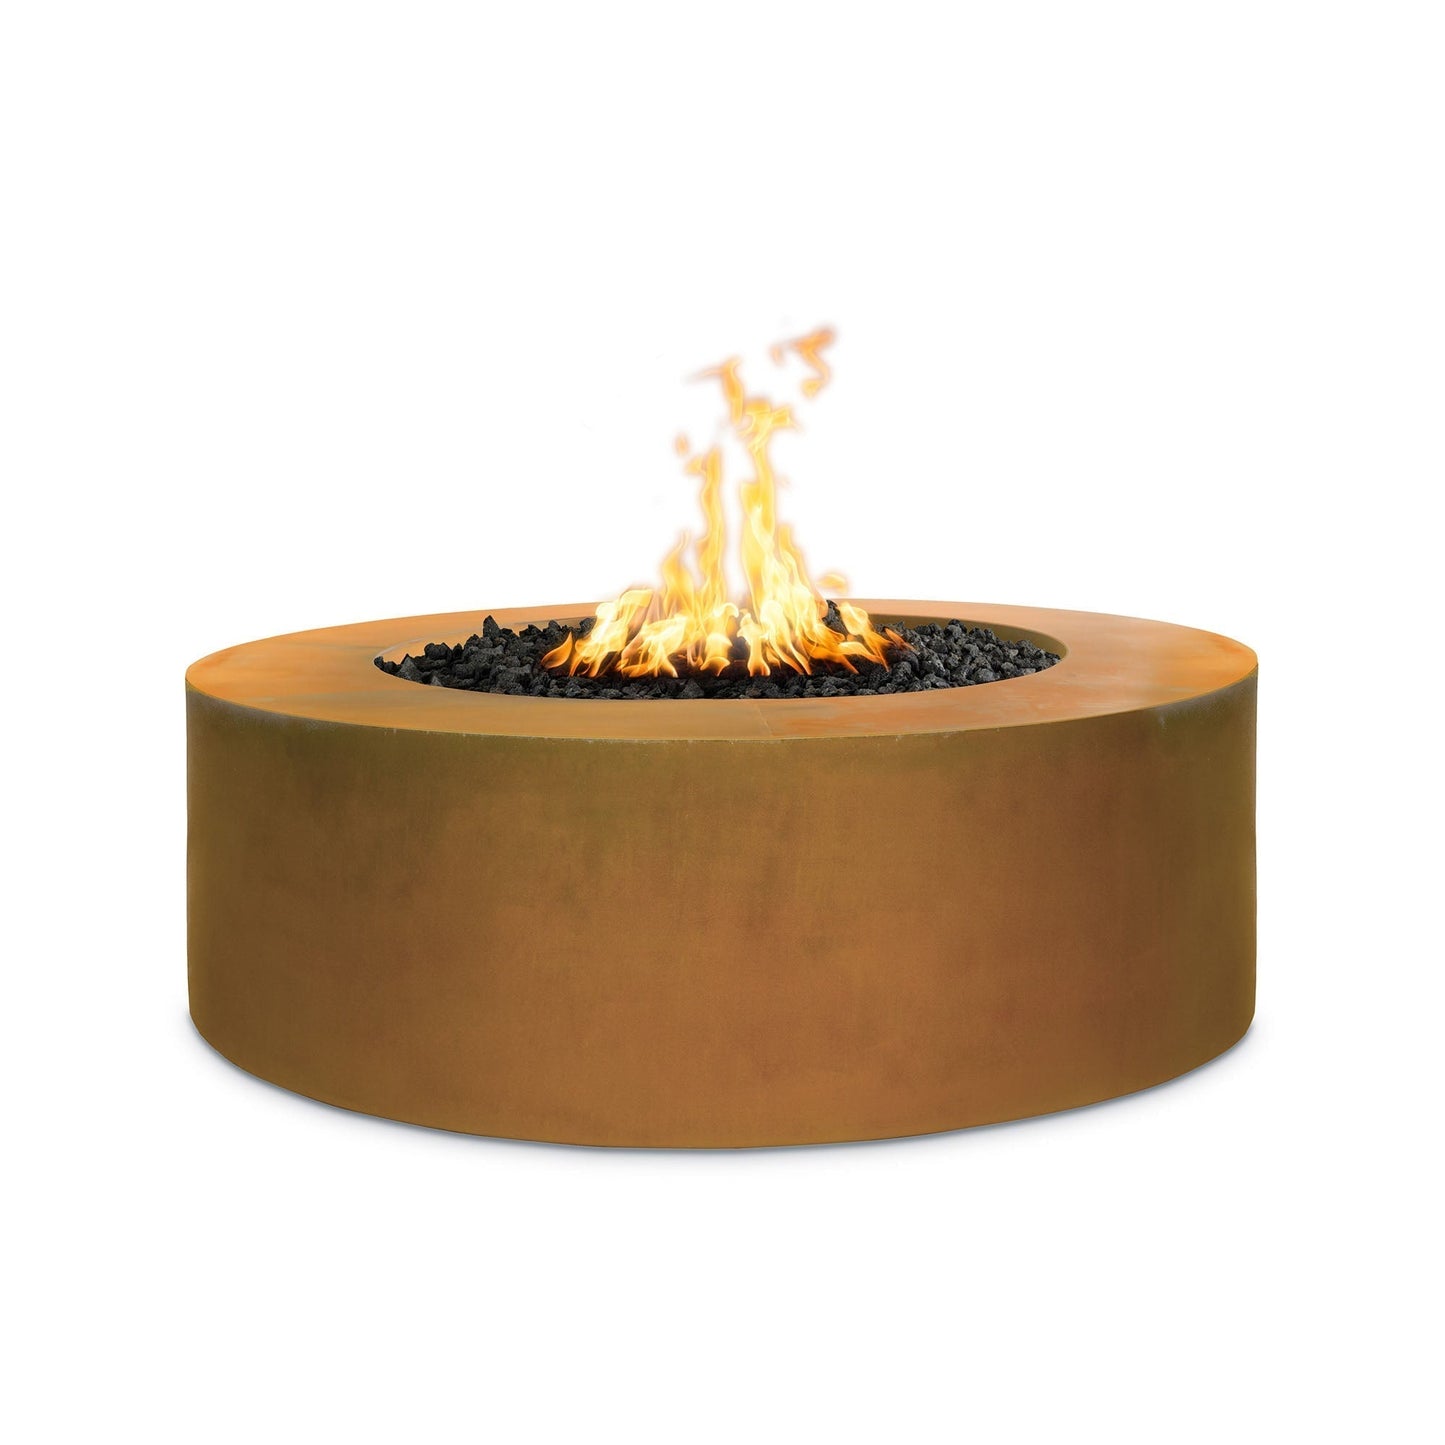 The Outdoor Plus 18" Tall Unity Corten Steel Fire Pit